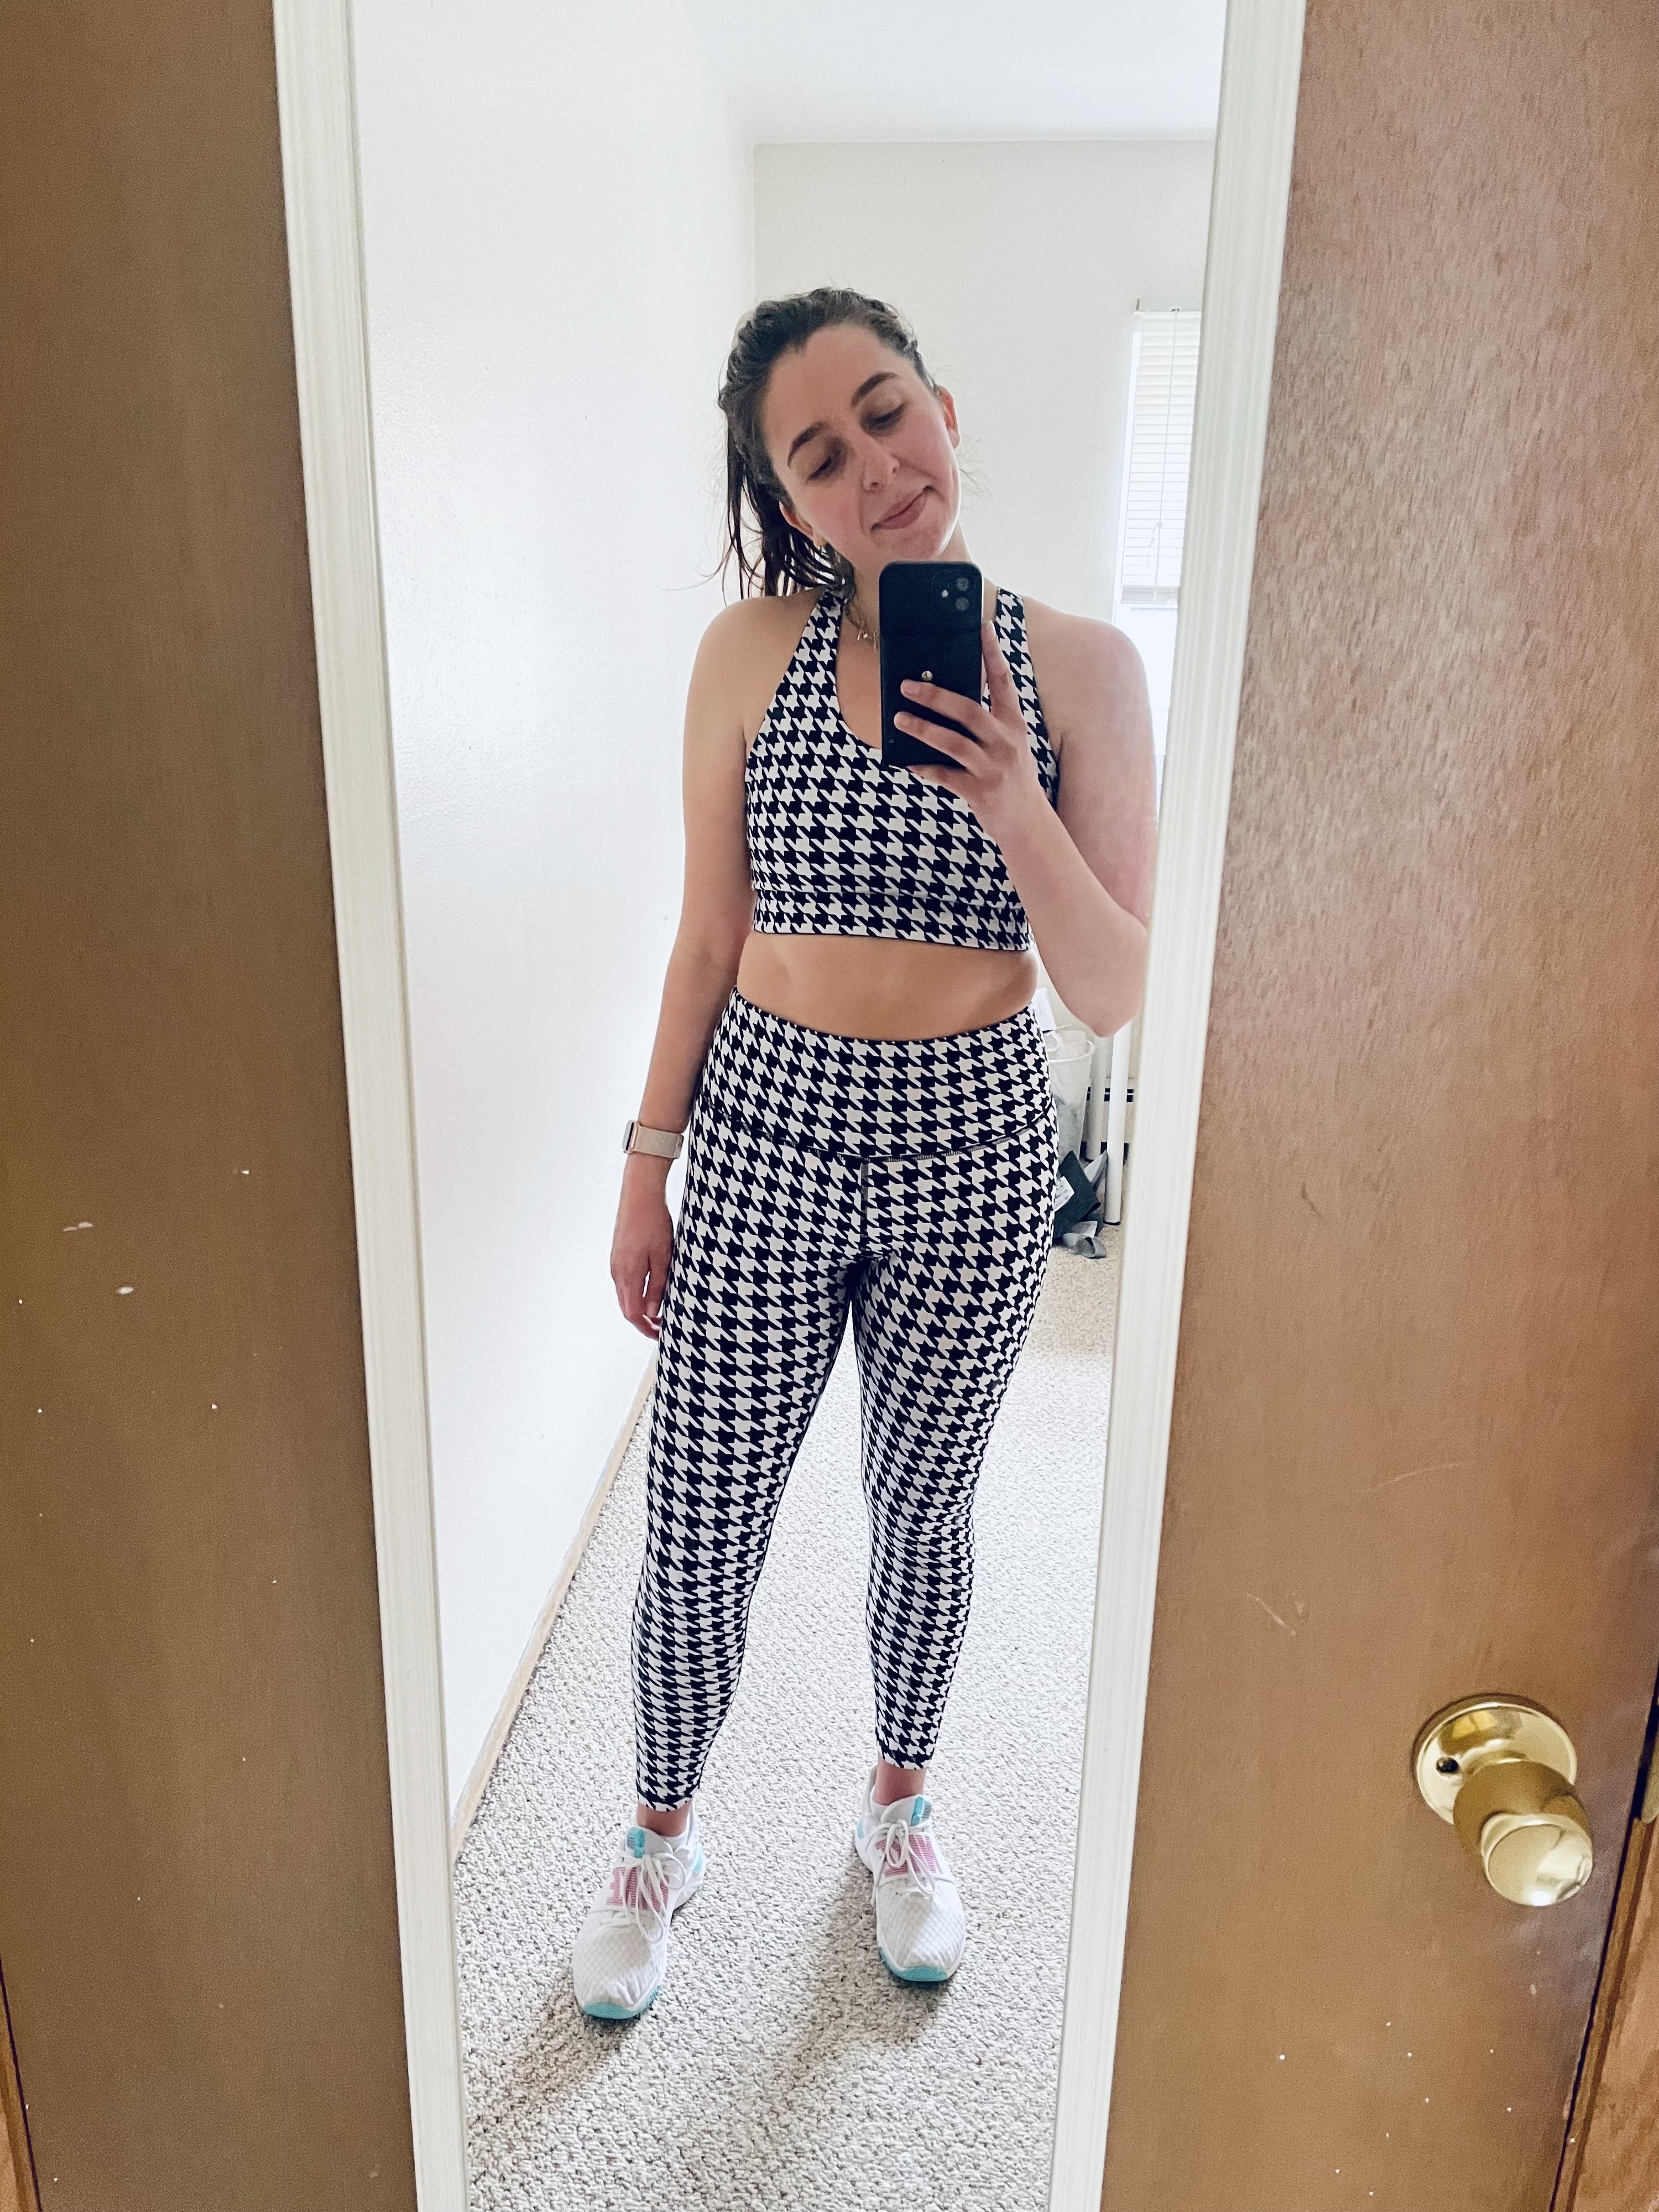 the writer wearing a black and white houndstooth legging and sports bra set